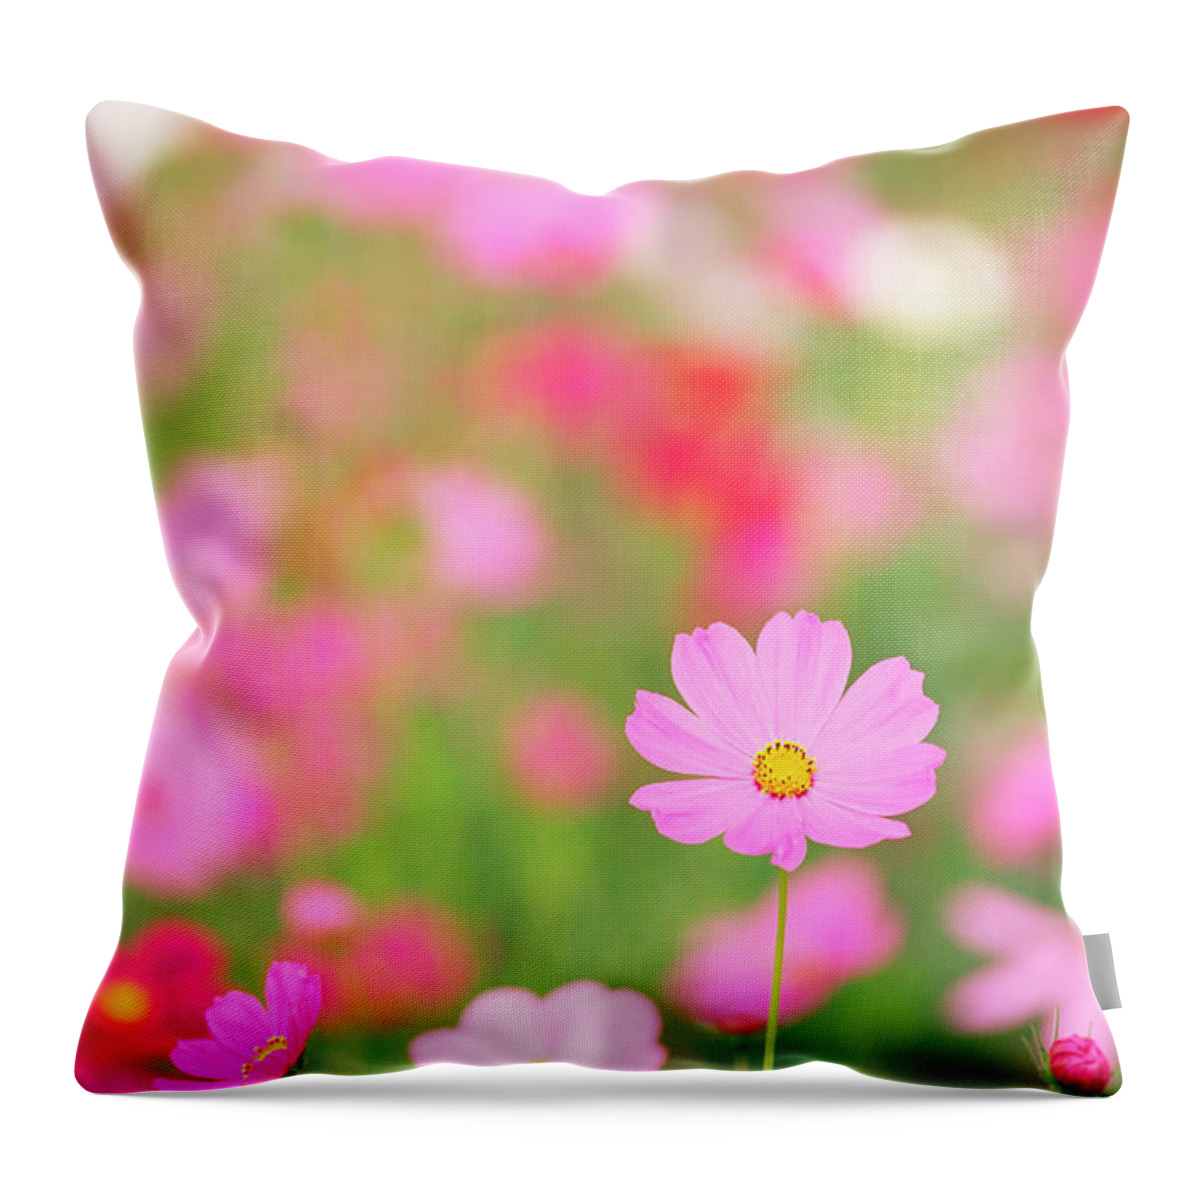 Scenics Throw Pillow featuring the photograph Cosmos Flowers by Ooyoo